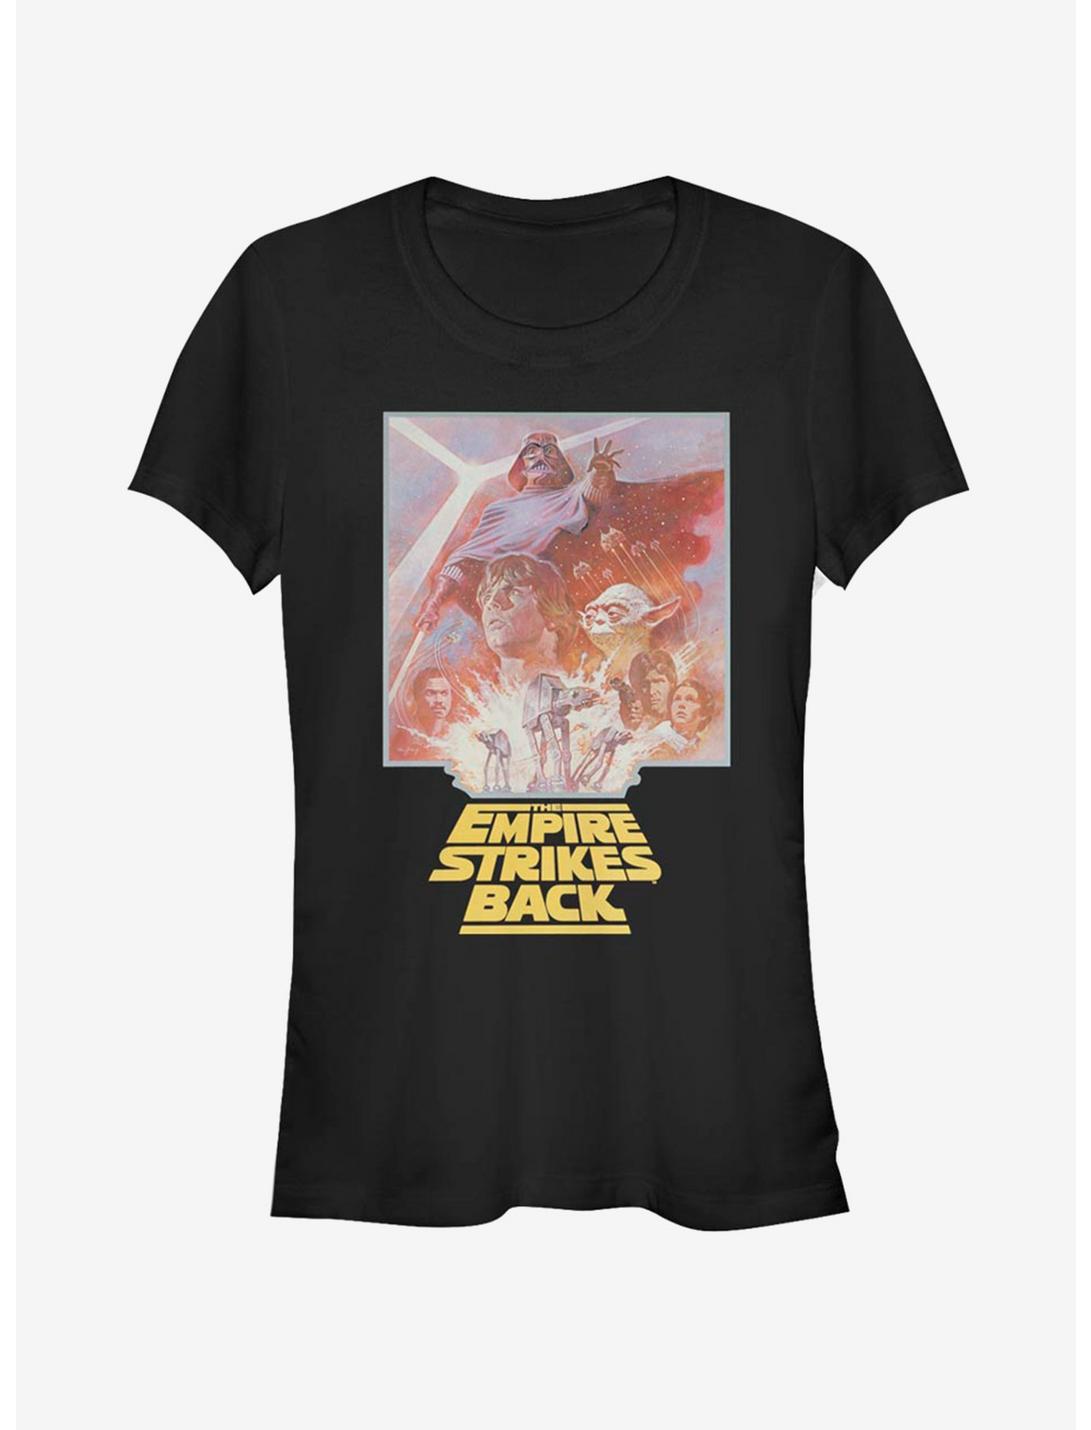 Star Wars The Empire Strikes Back Characters And Walkers Girls T-Shirt, BLACK, hi-res